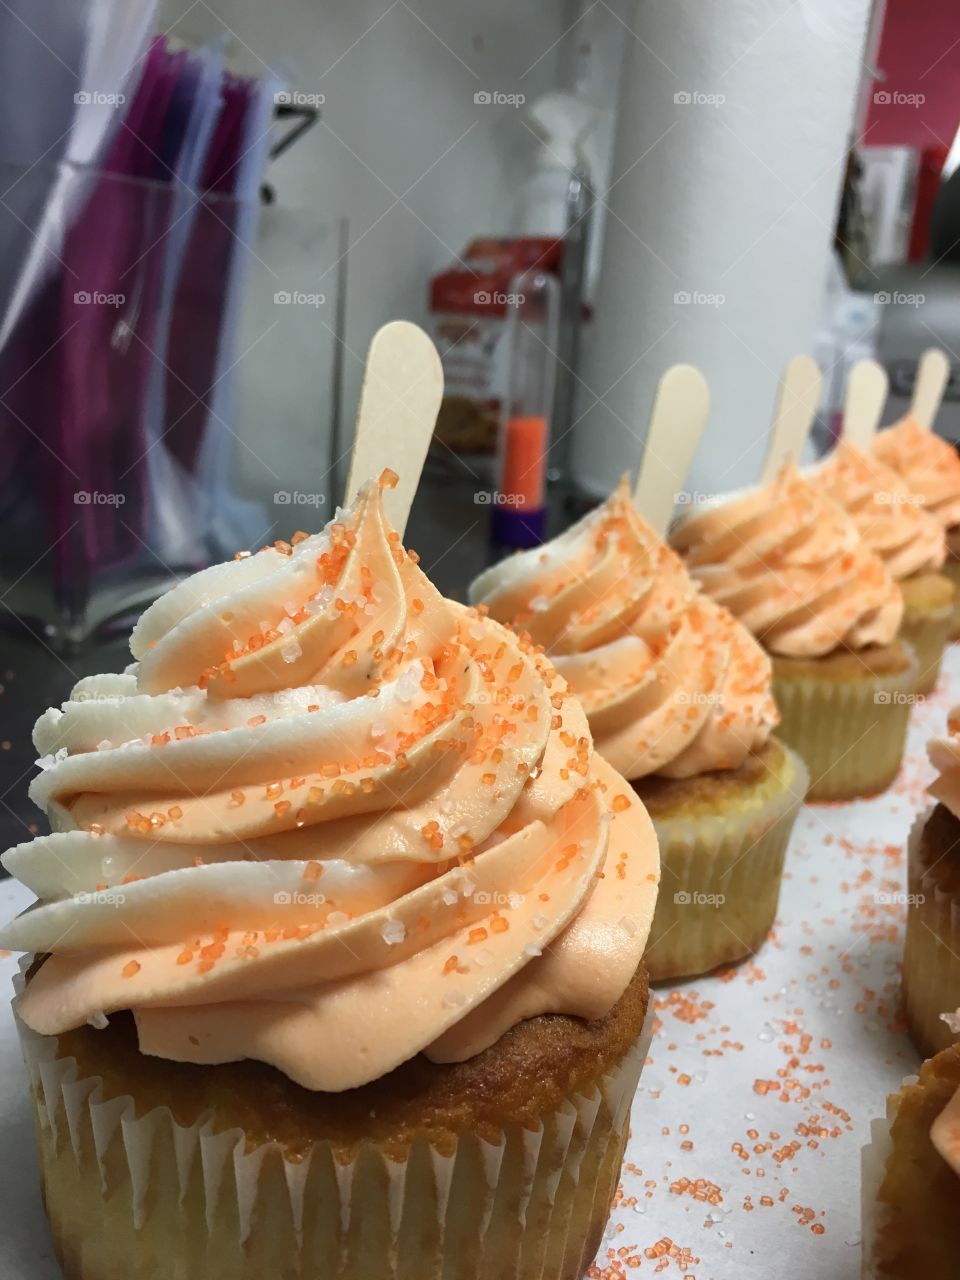 Mmmm...orange creamsicle cupcakes!! Vanilla cake with orange cream frosting! Topped with sprinkles and a popsicle stick!